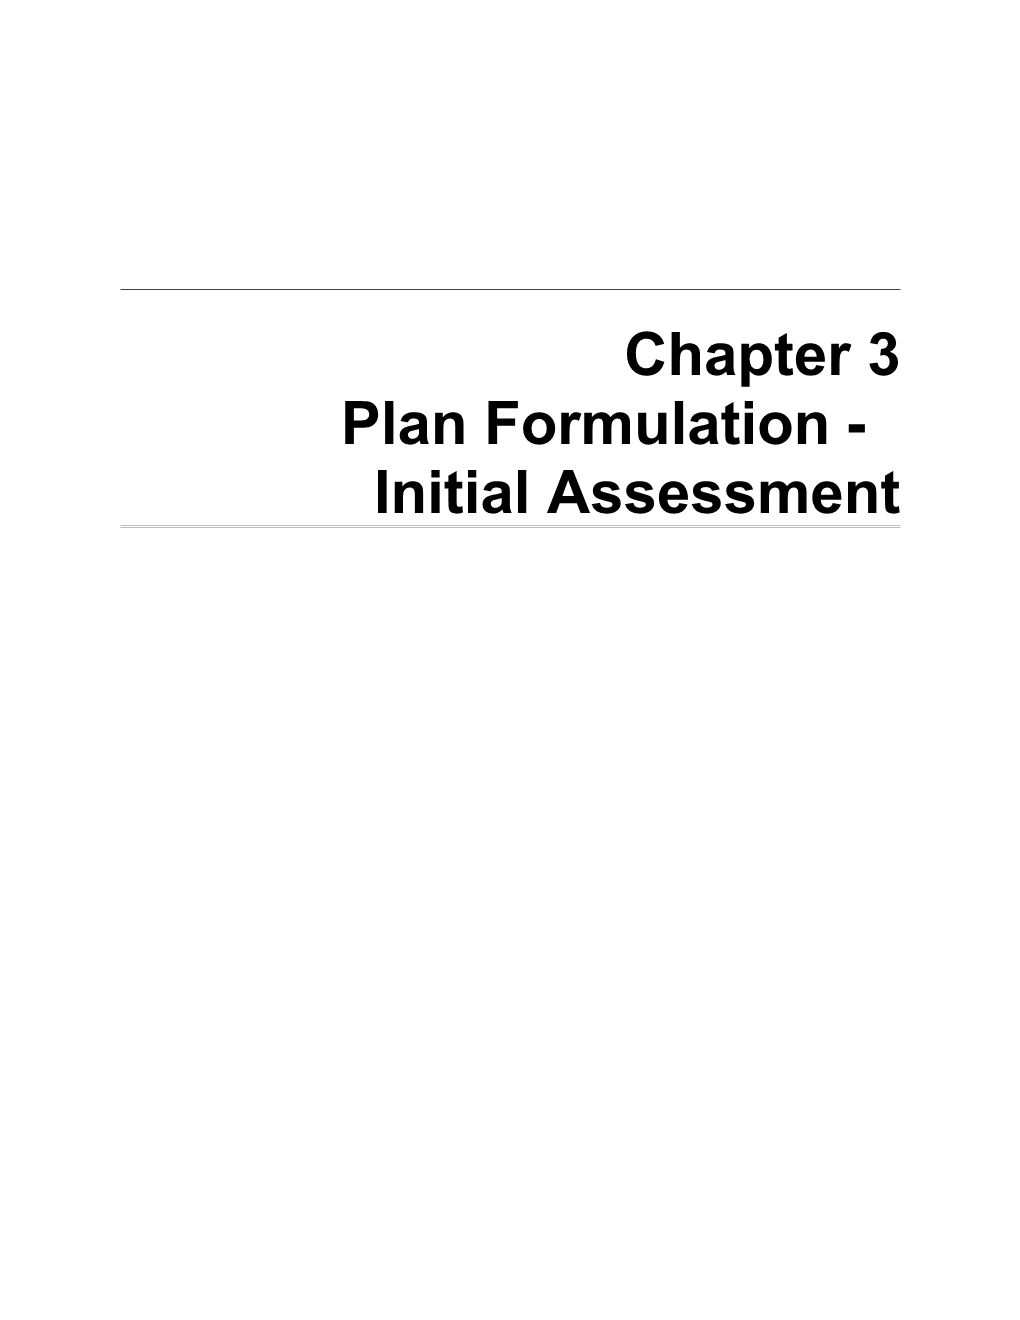 3.0. Plan Formulation and Initial Assessment